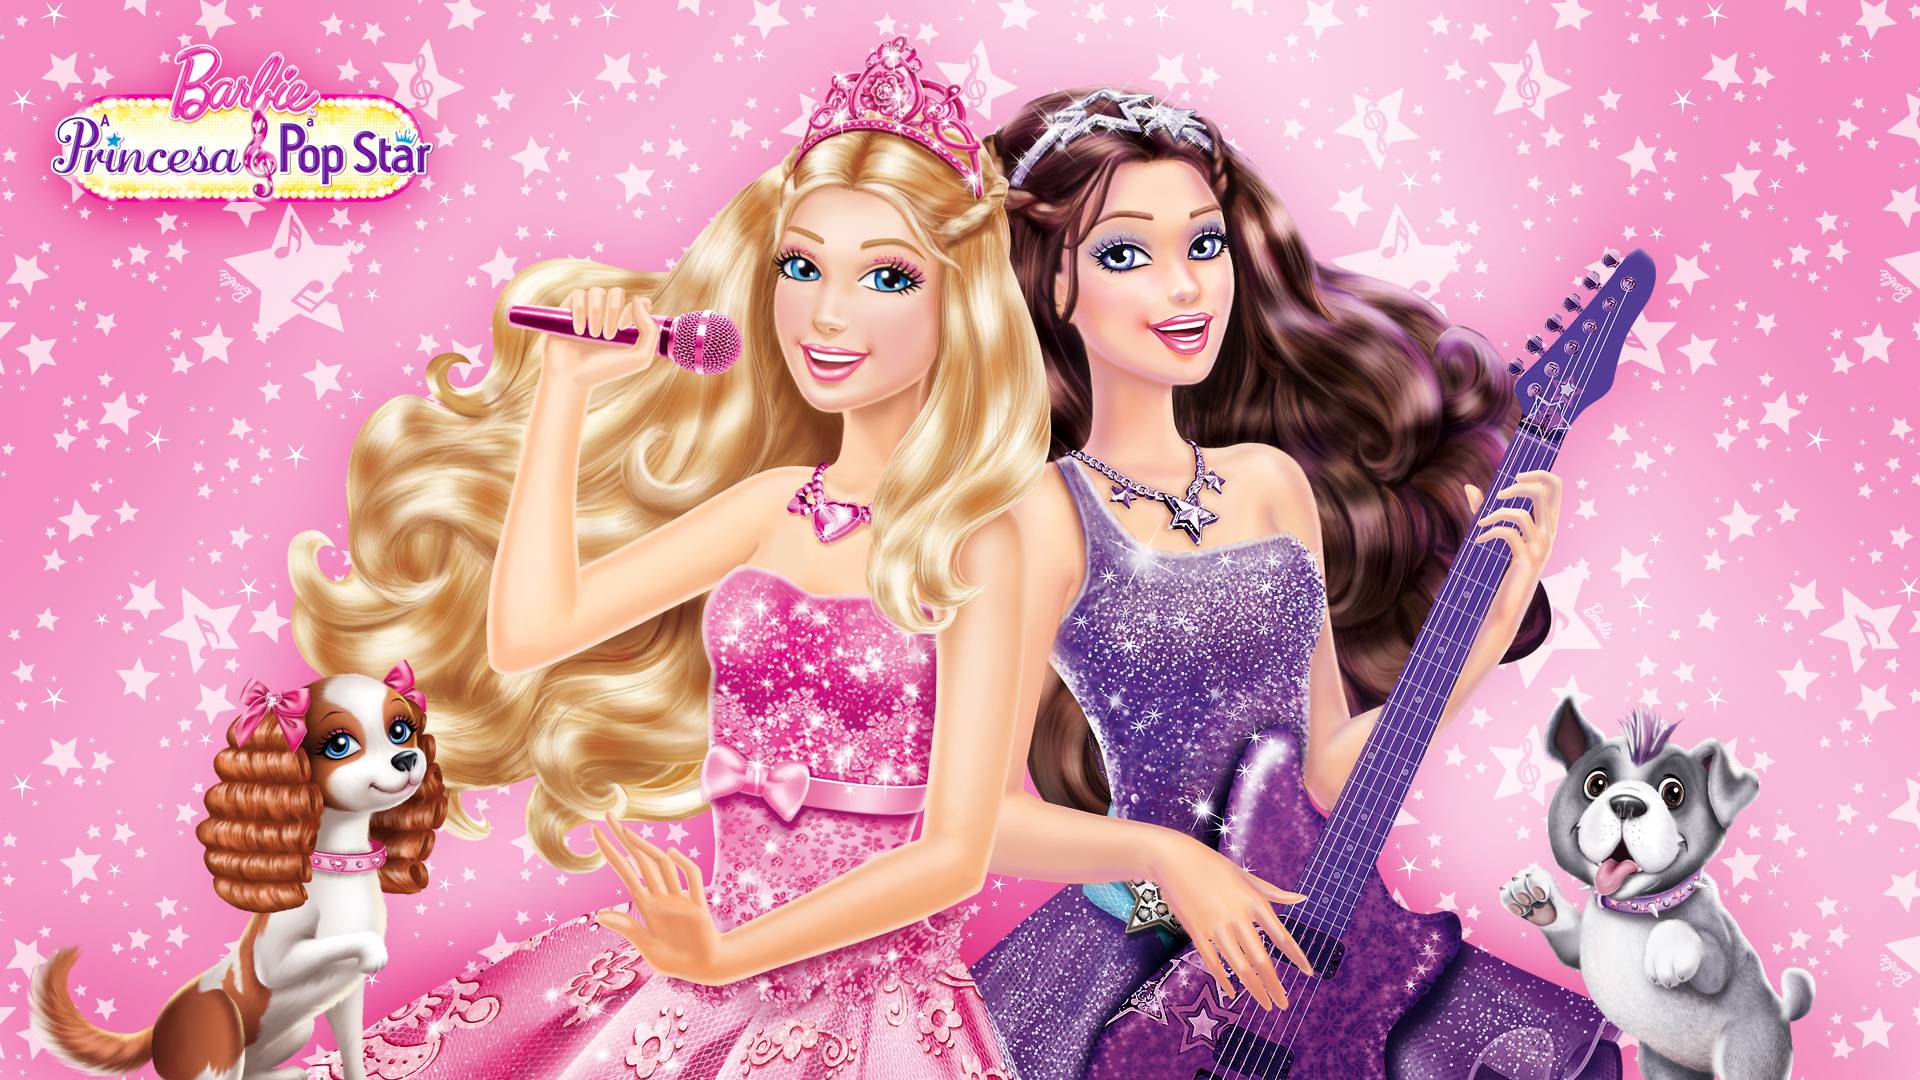 Barbies Pictures Wallpapers Group (79+)